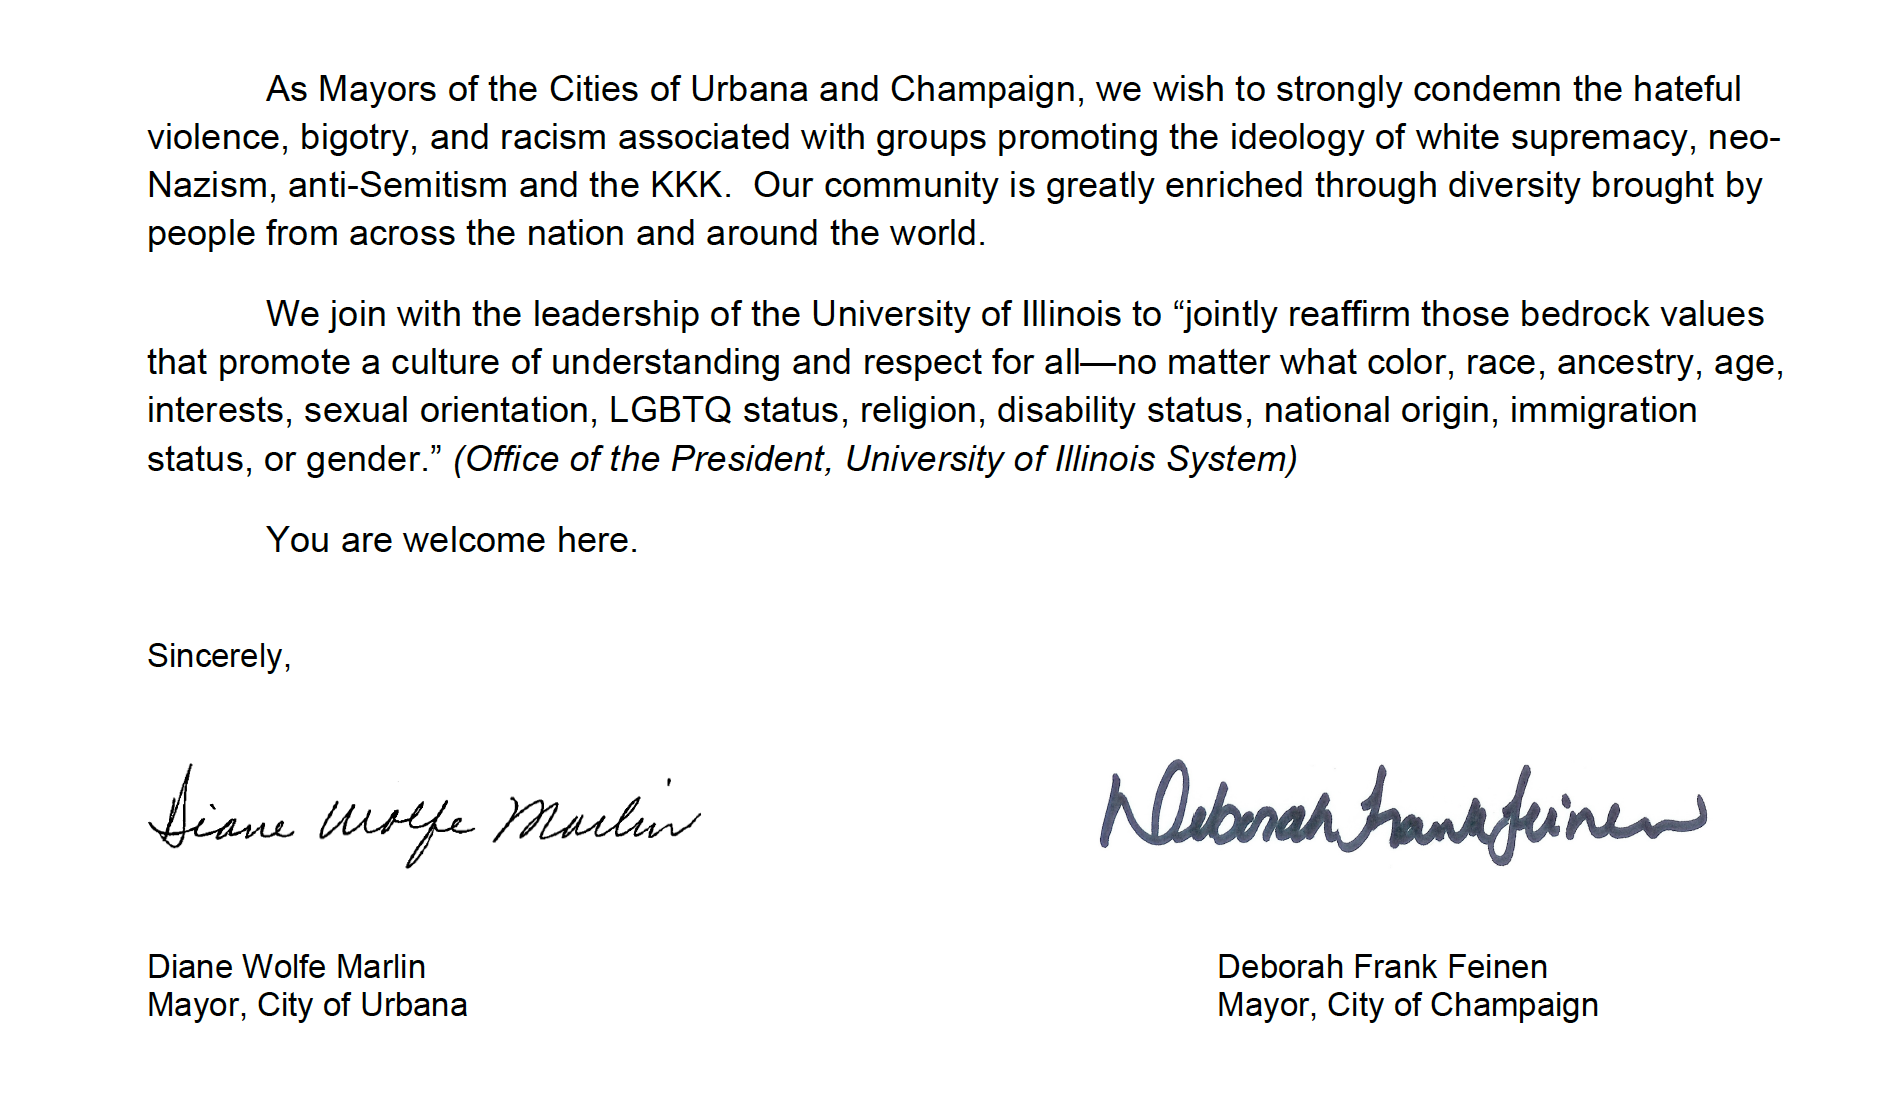 Mayors of Champaign and Urbana release joint statement denouncing hatred